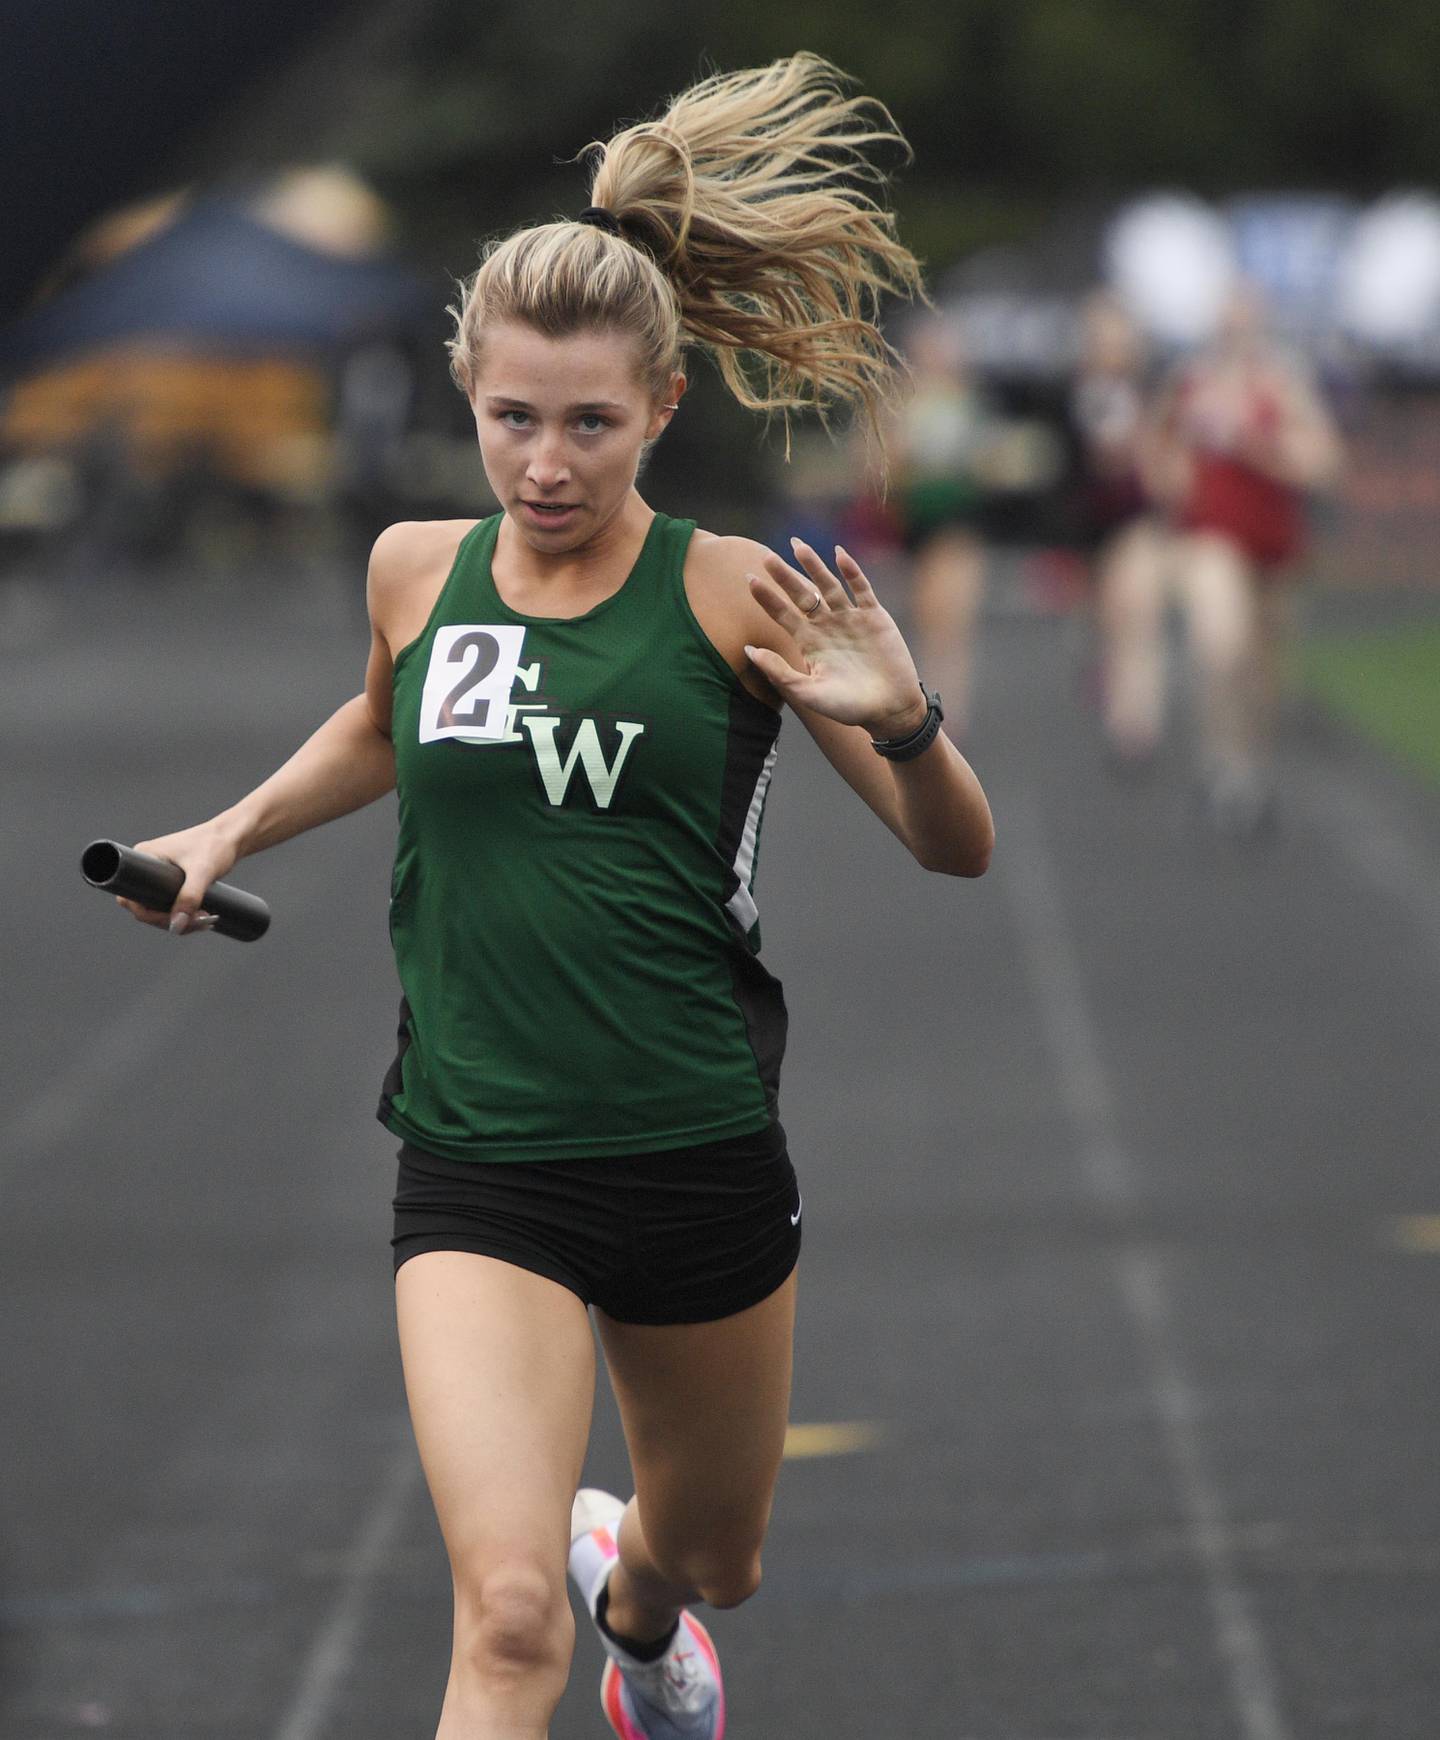 Glenbard West’s Audrey Allman finishes the anchor leg of the of the 4x200-meter relay at the Wheaton Warrenville South girls track invitational in Wheaton on Friday, April 29, 2022.